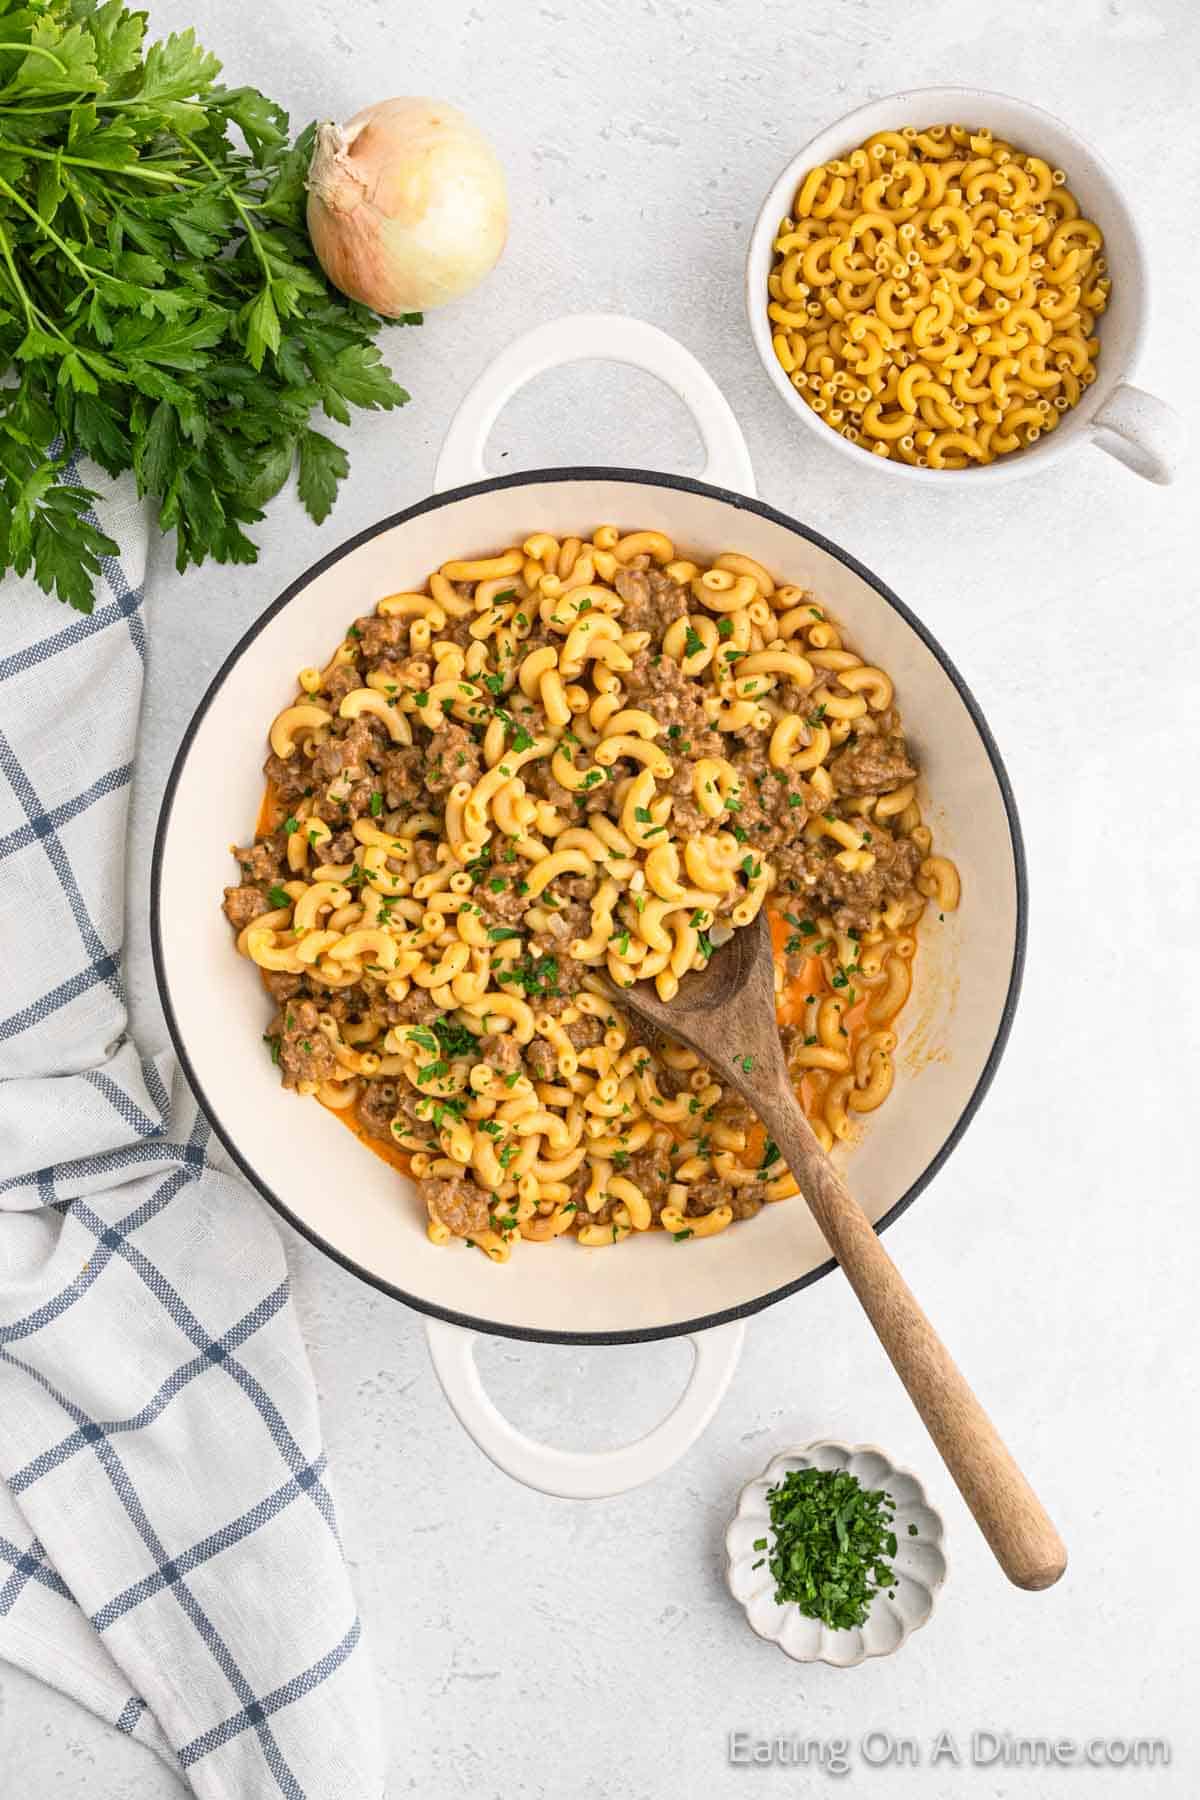 Top view of a skillet filled with Homemade Cheeseburger Helper, featuring macaroni pasta, ground beef, and garnished with chopped parsley. The skillet is surrounded by fresh parsley, an onion, uncooked macaroni, and a blue checkered kitchen towel on a white surface.